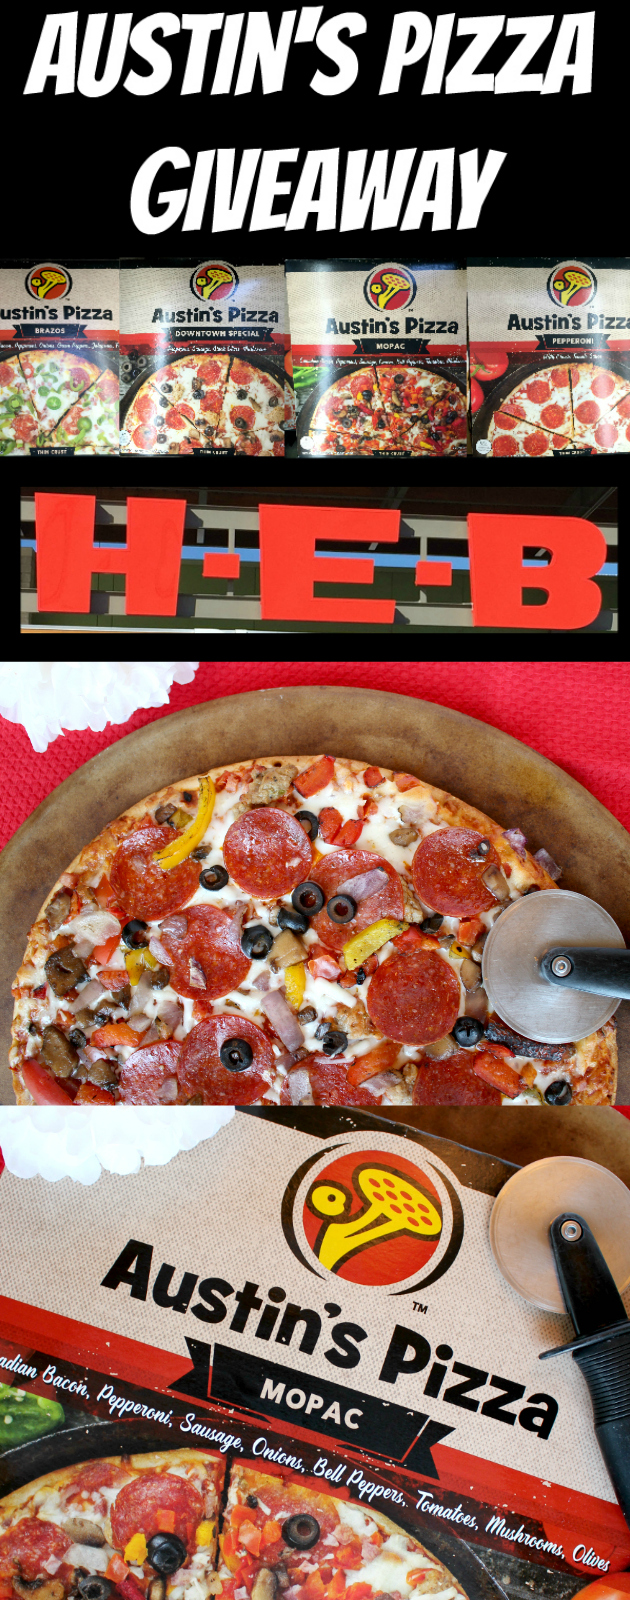 Free Austin's Pizza at H-E-B Giveaway *Texas Only*